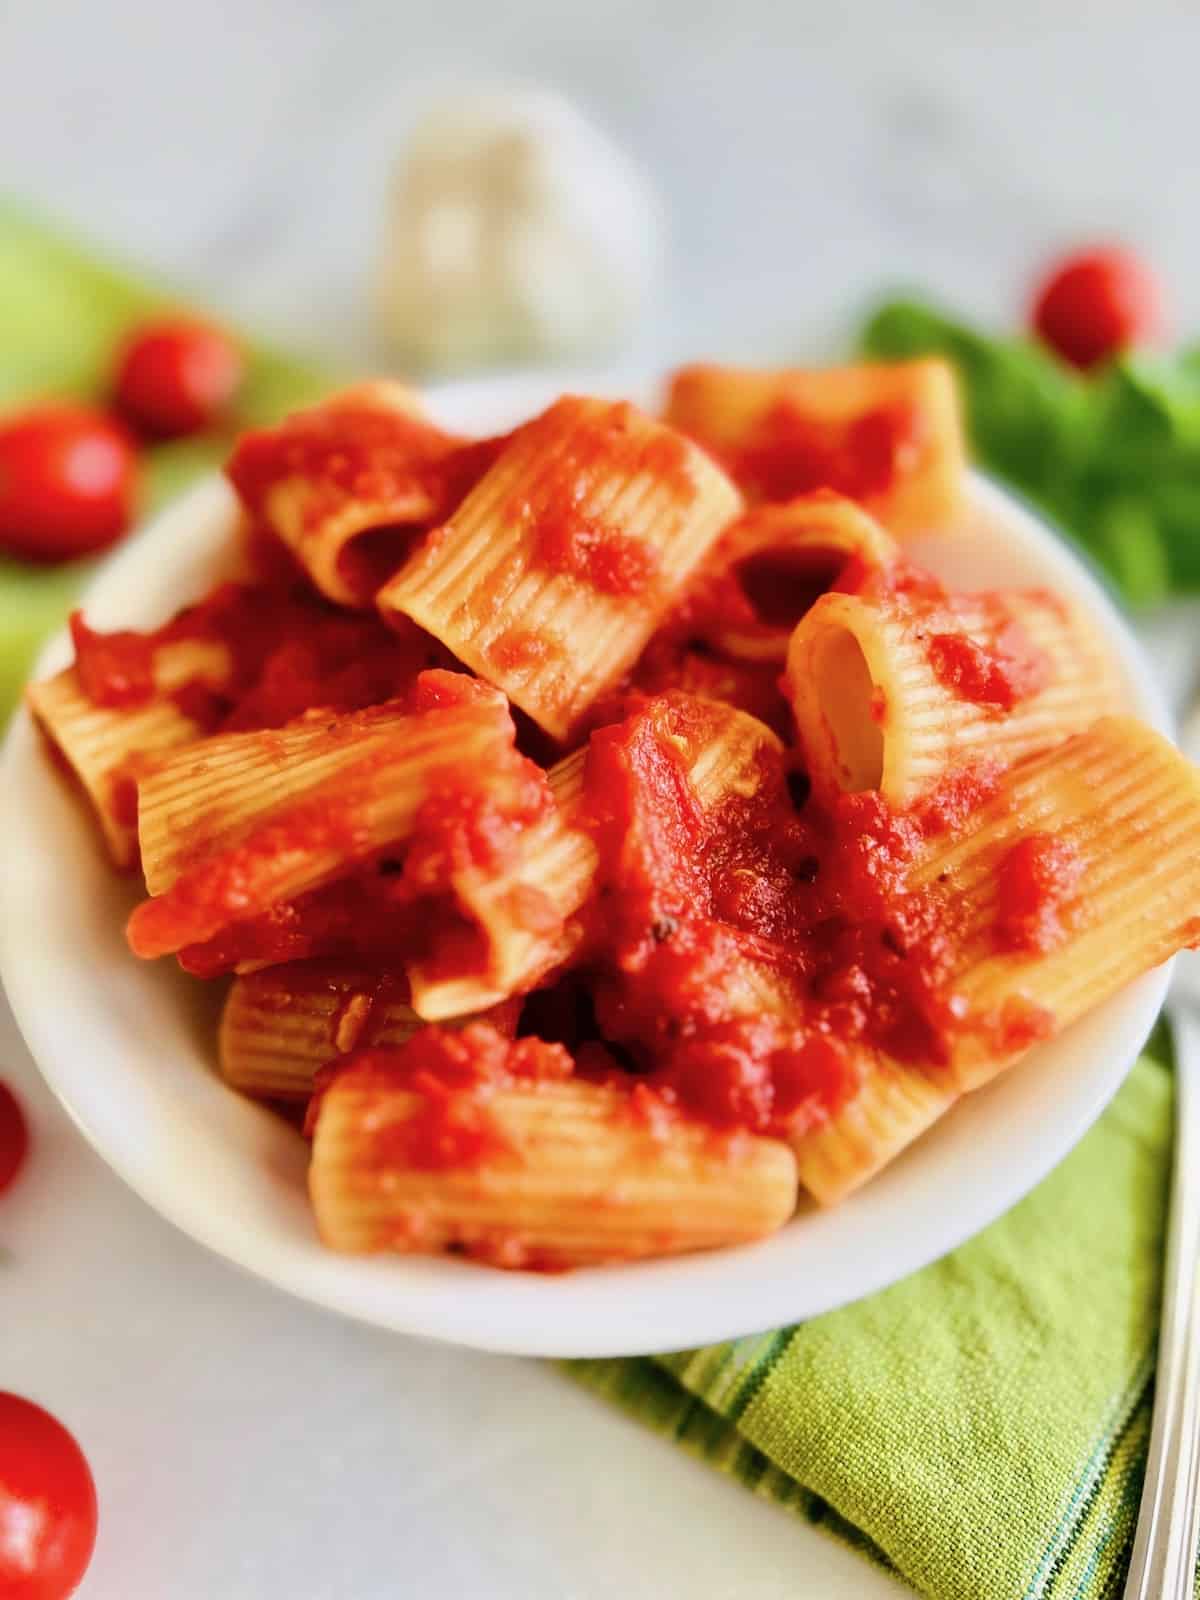 Bowl filled with rigatoni pasta in a red sauce. 